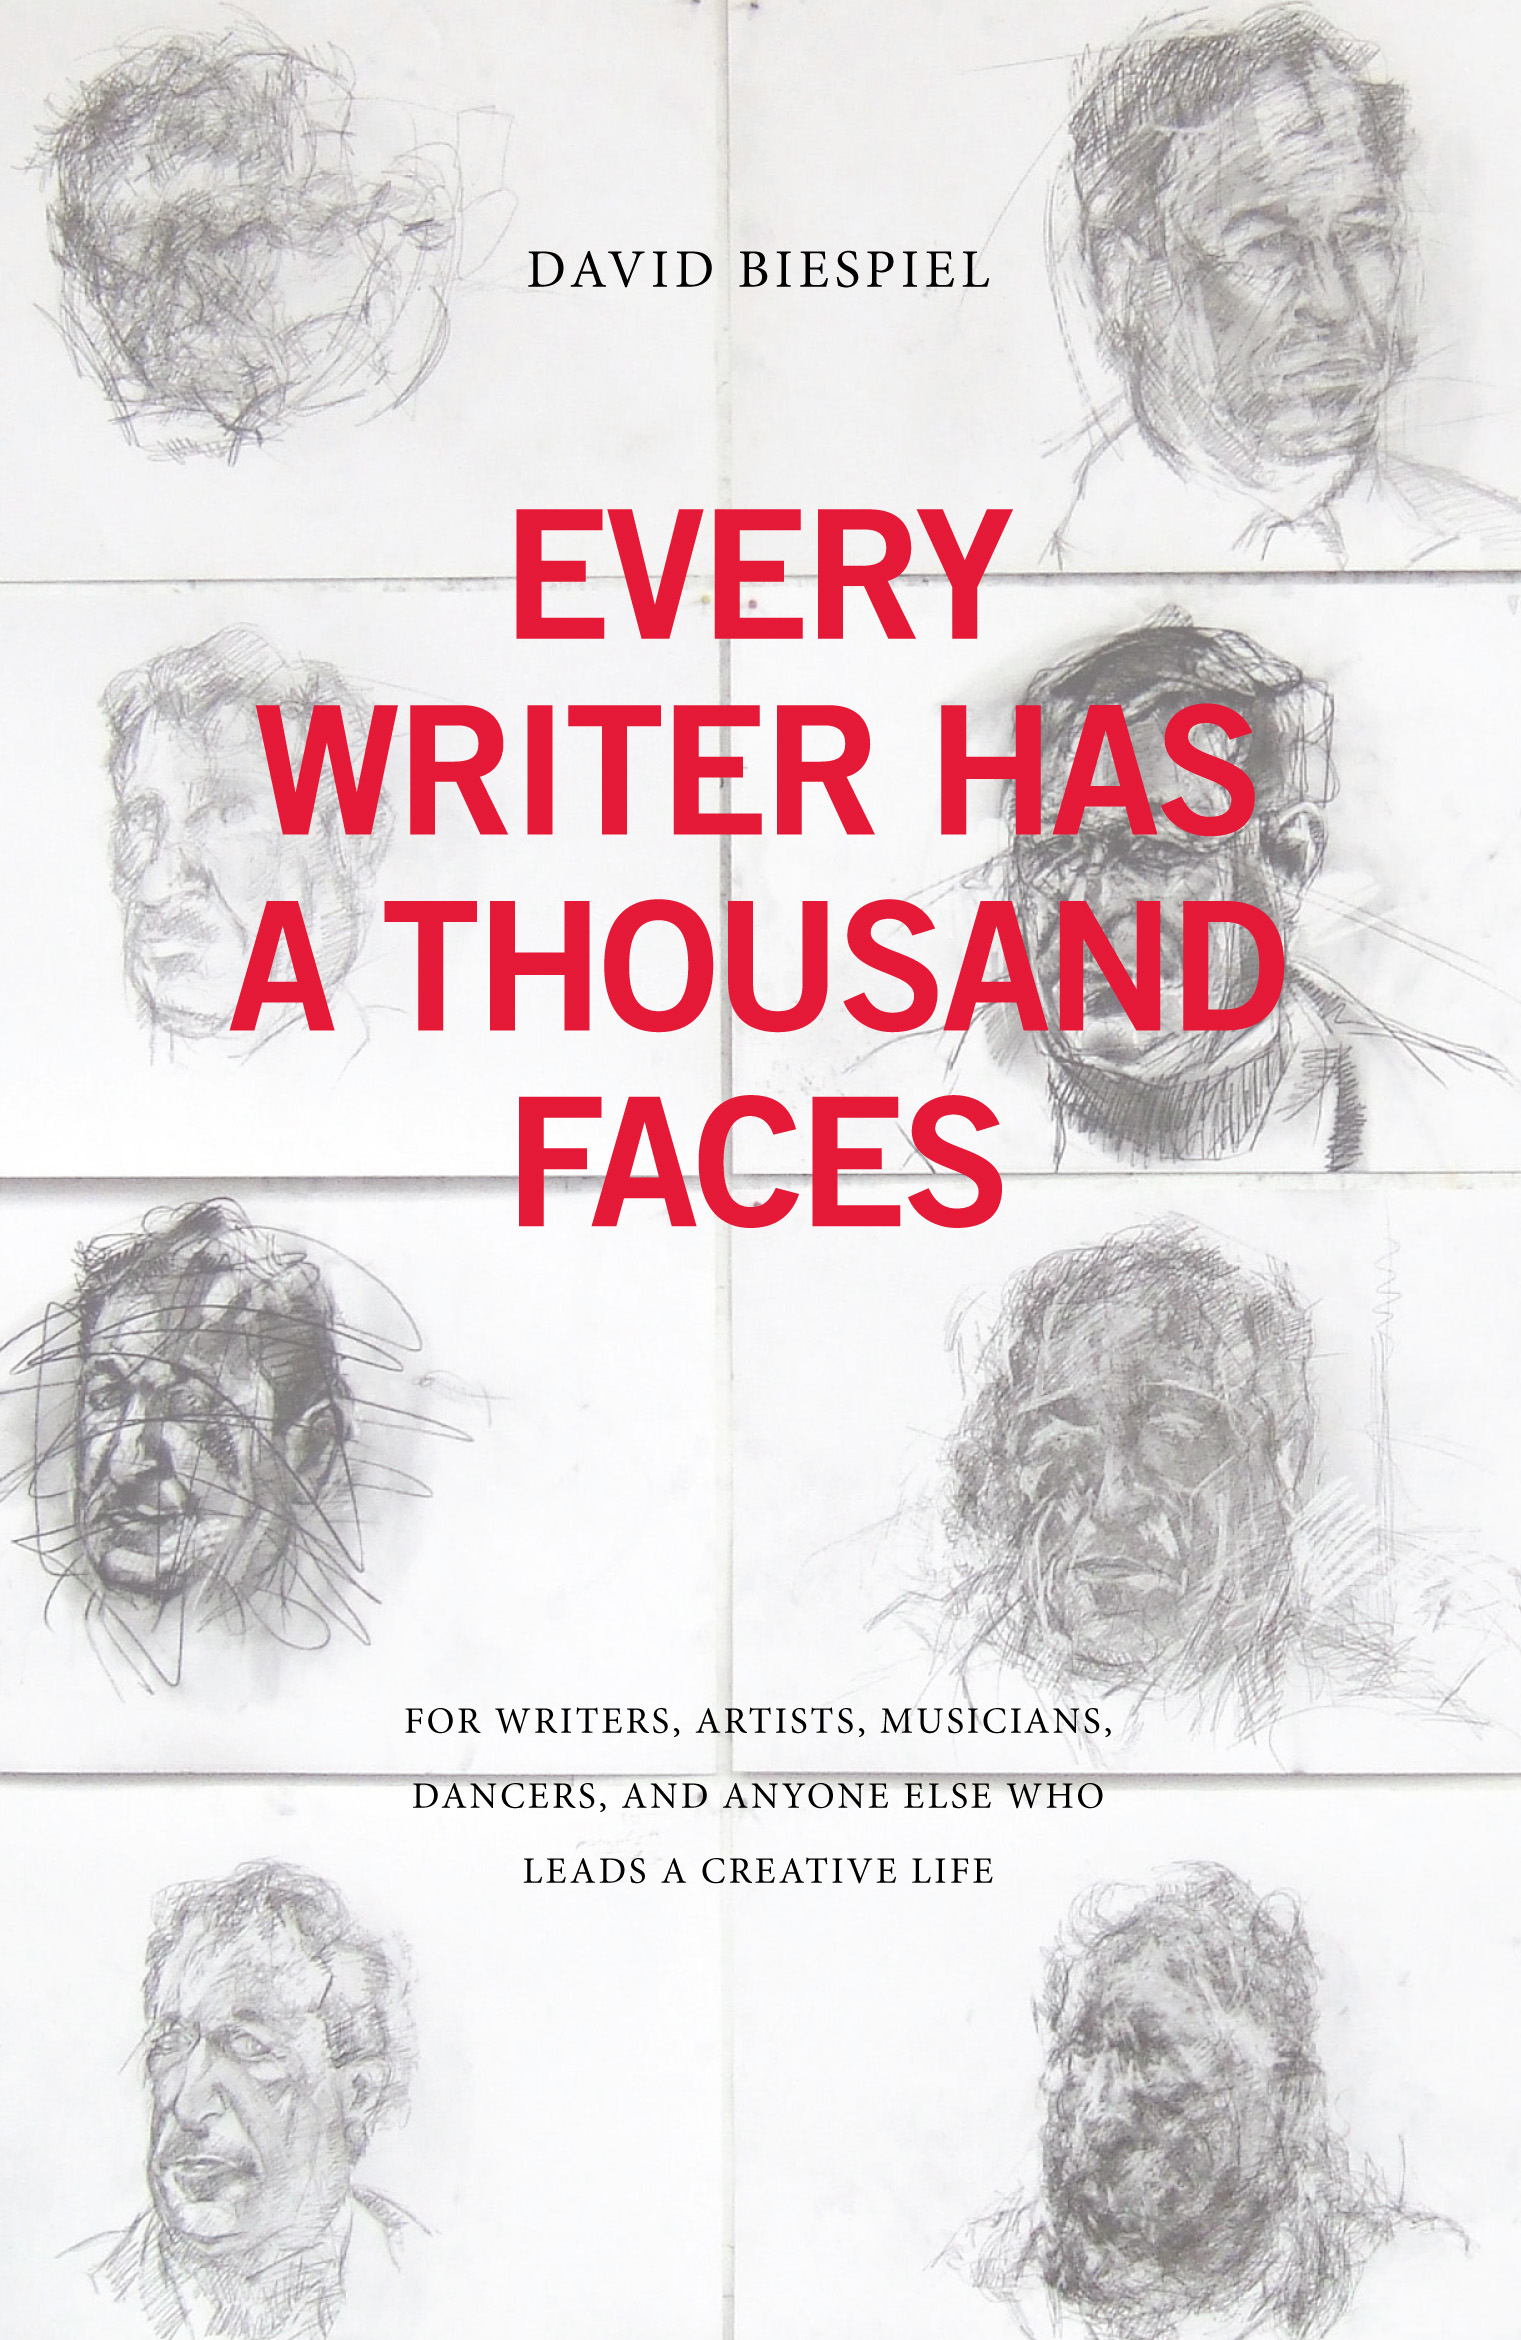 Every Writer Has a Thousand Faces by David Biespiel